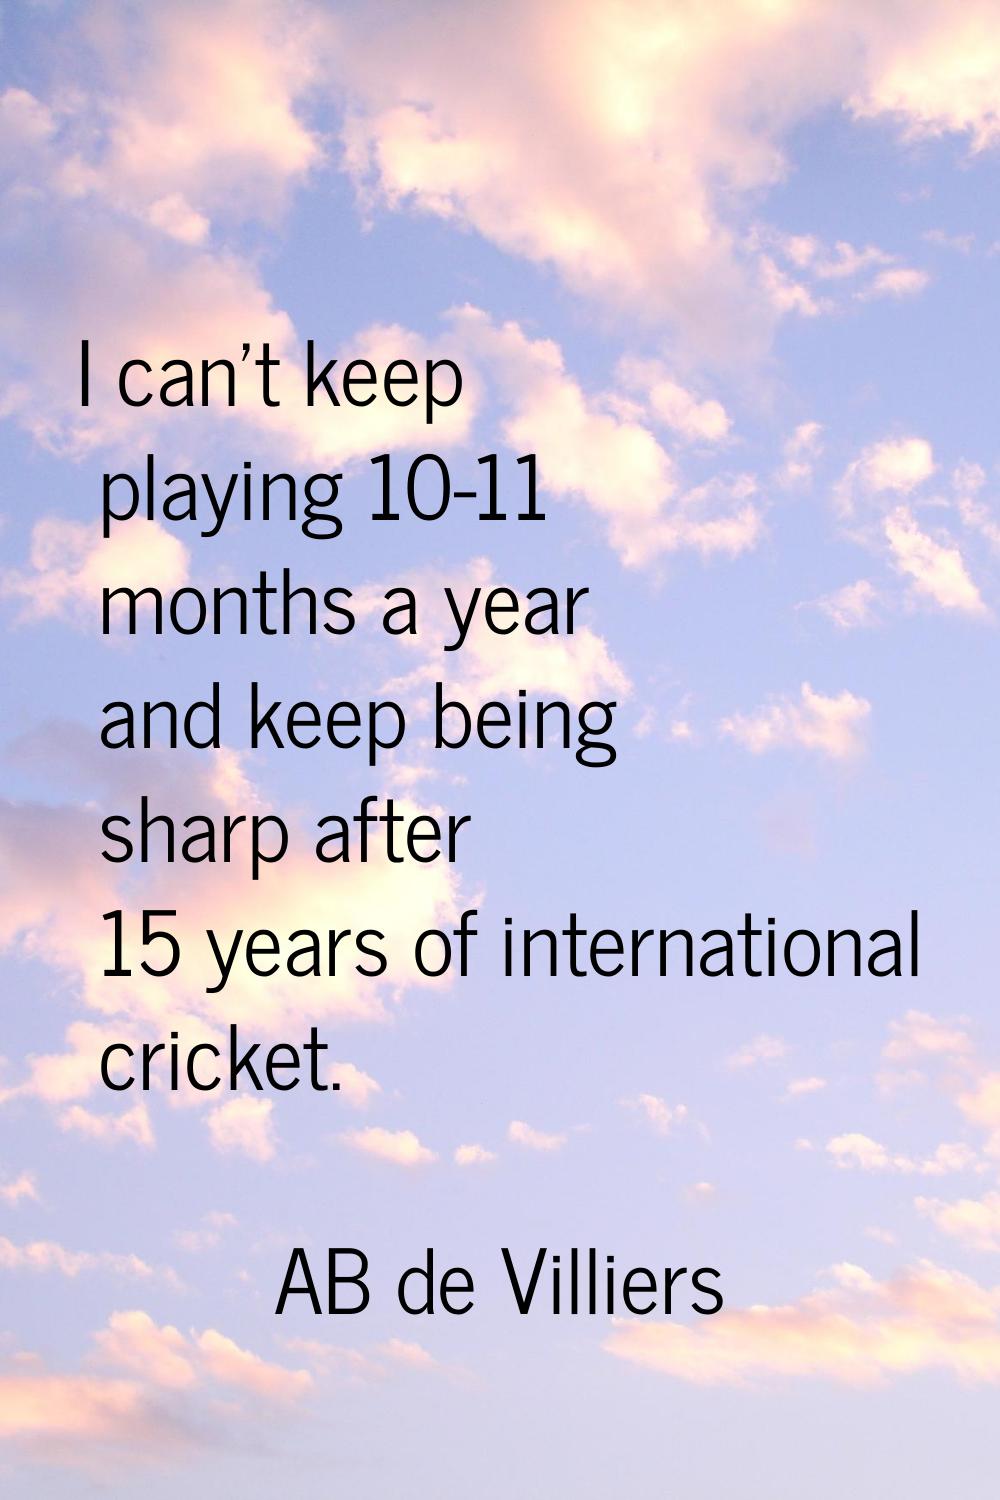 I can't keep playing 10-11 months a year and keep being sharp after 15 years of international crick